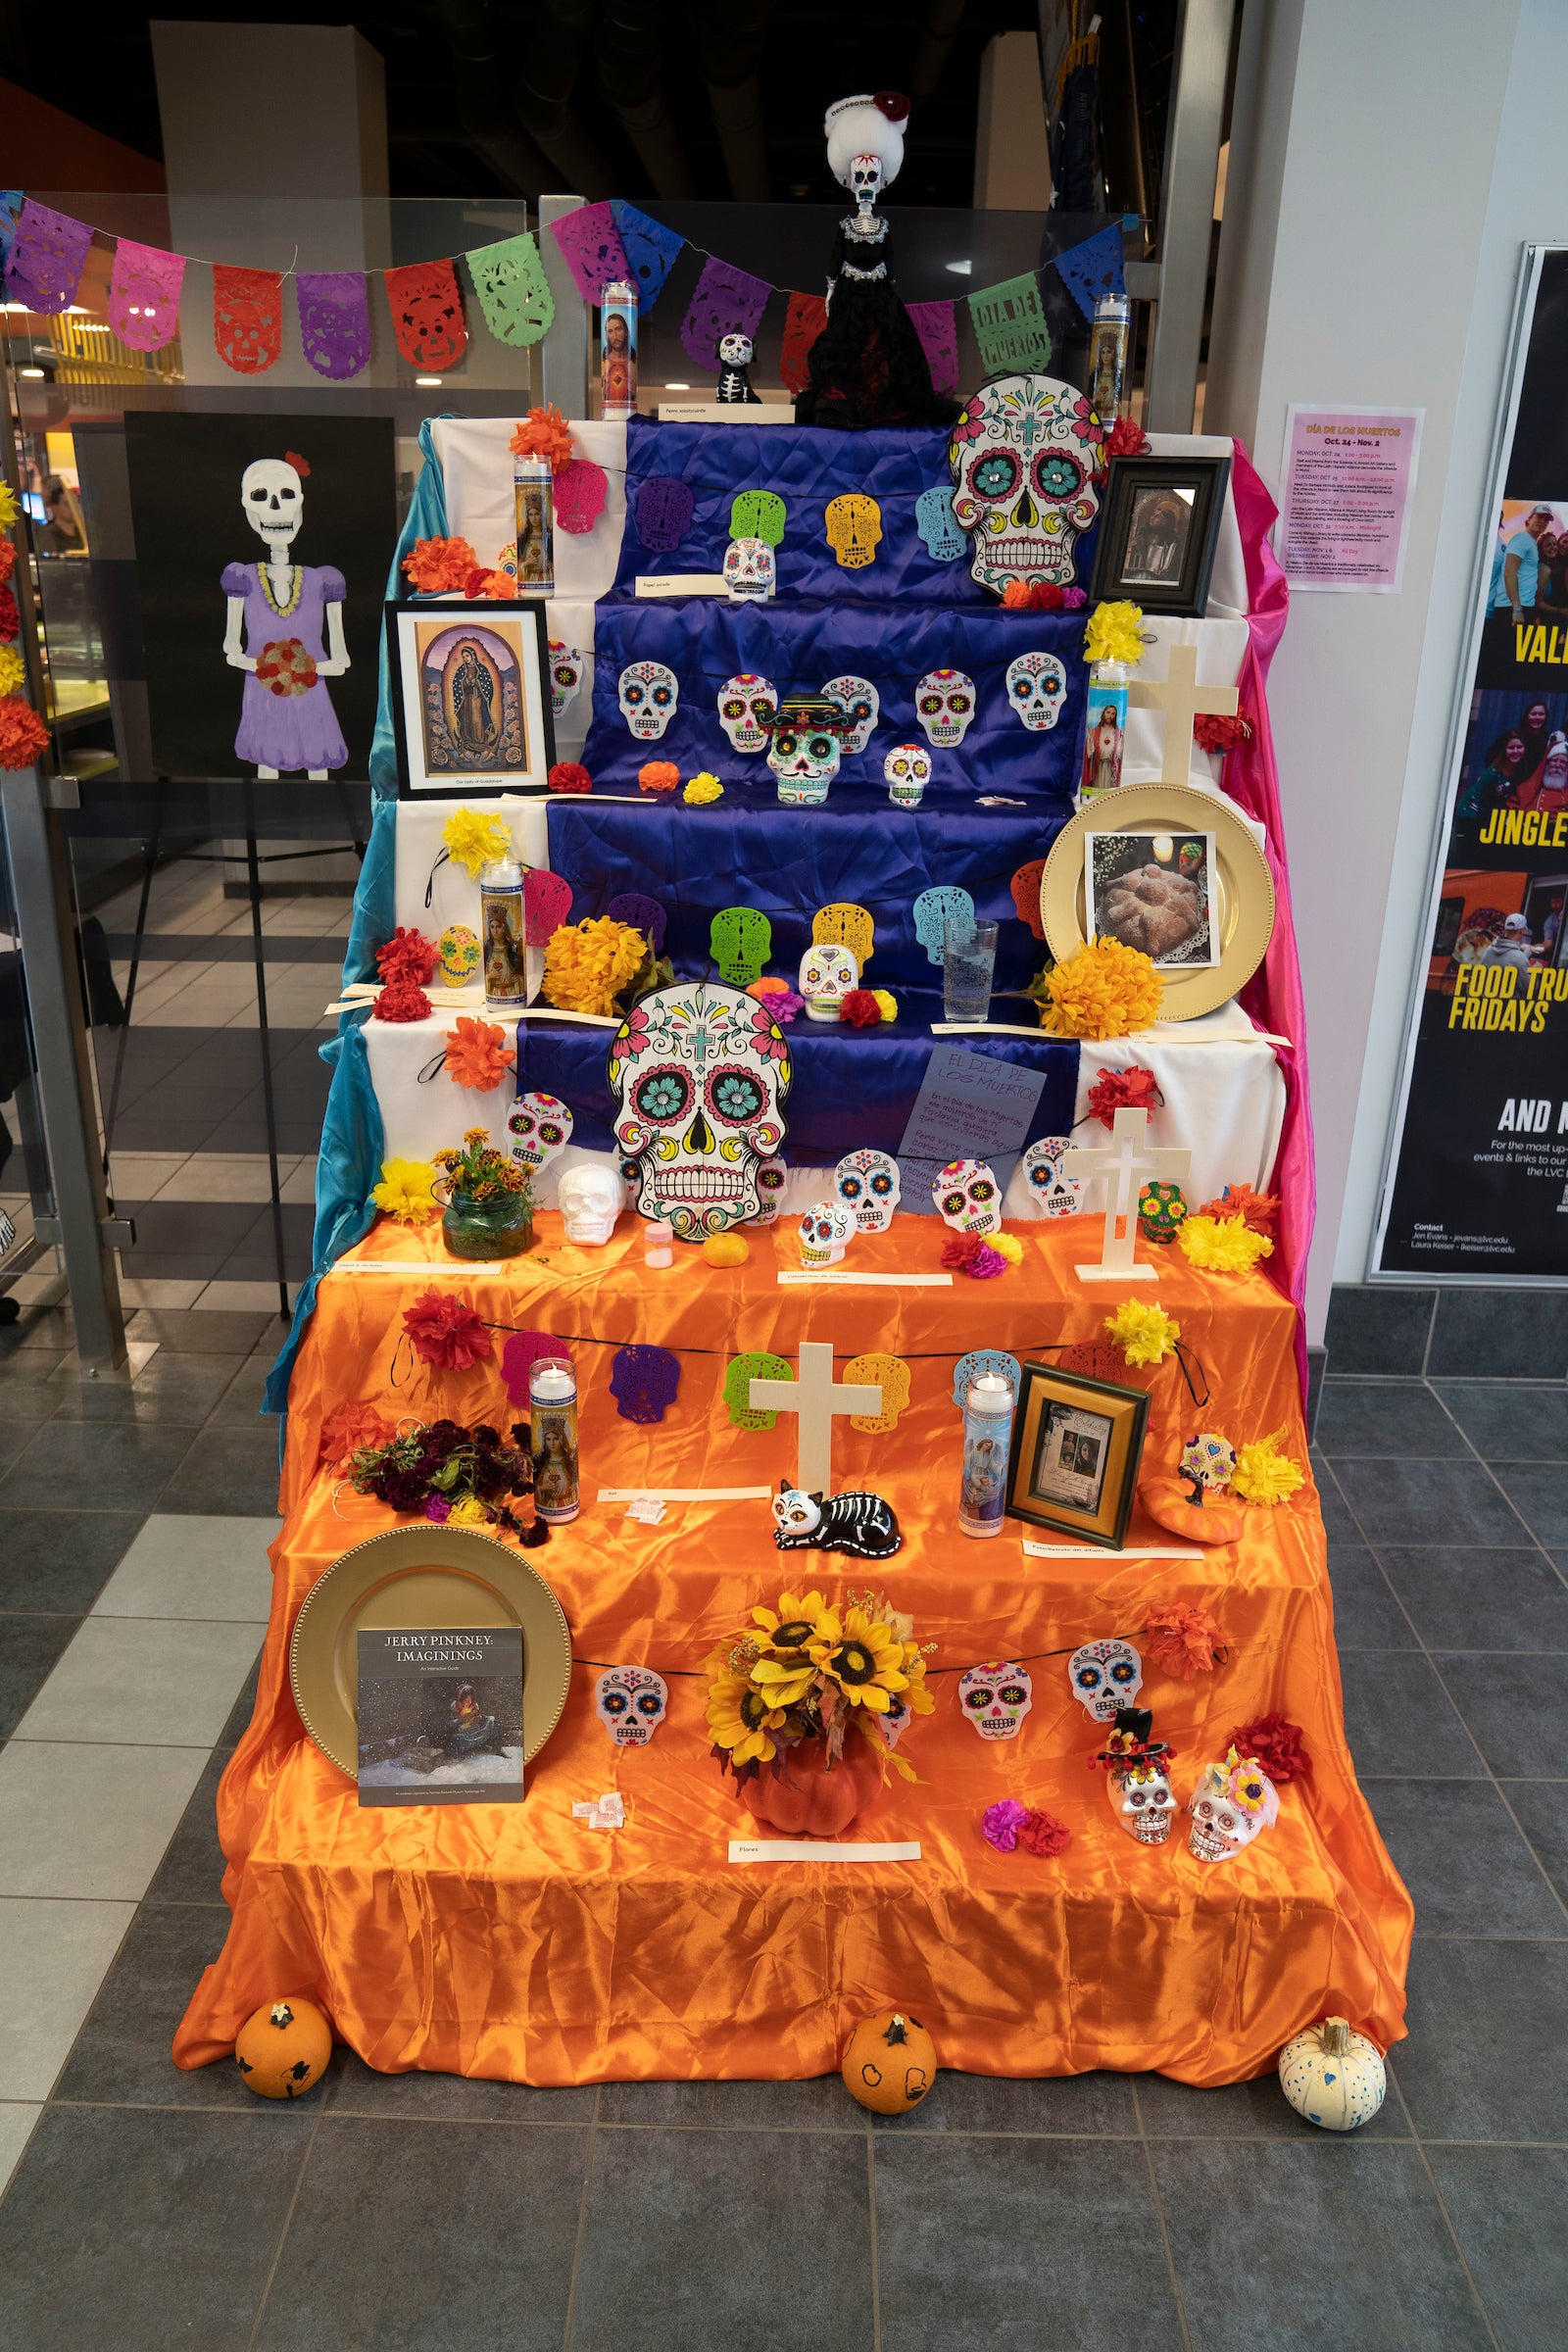 Day of the Dead ofrenda display in Mund College Center